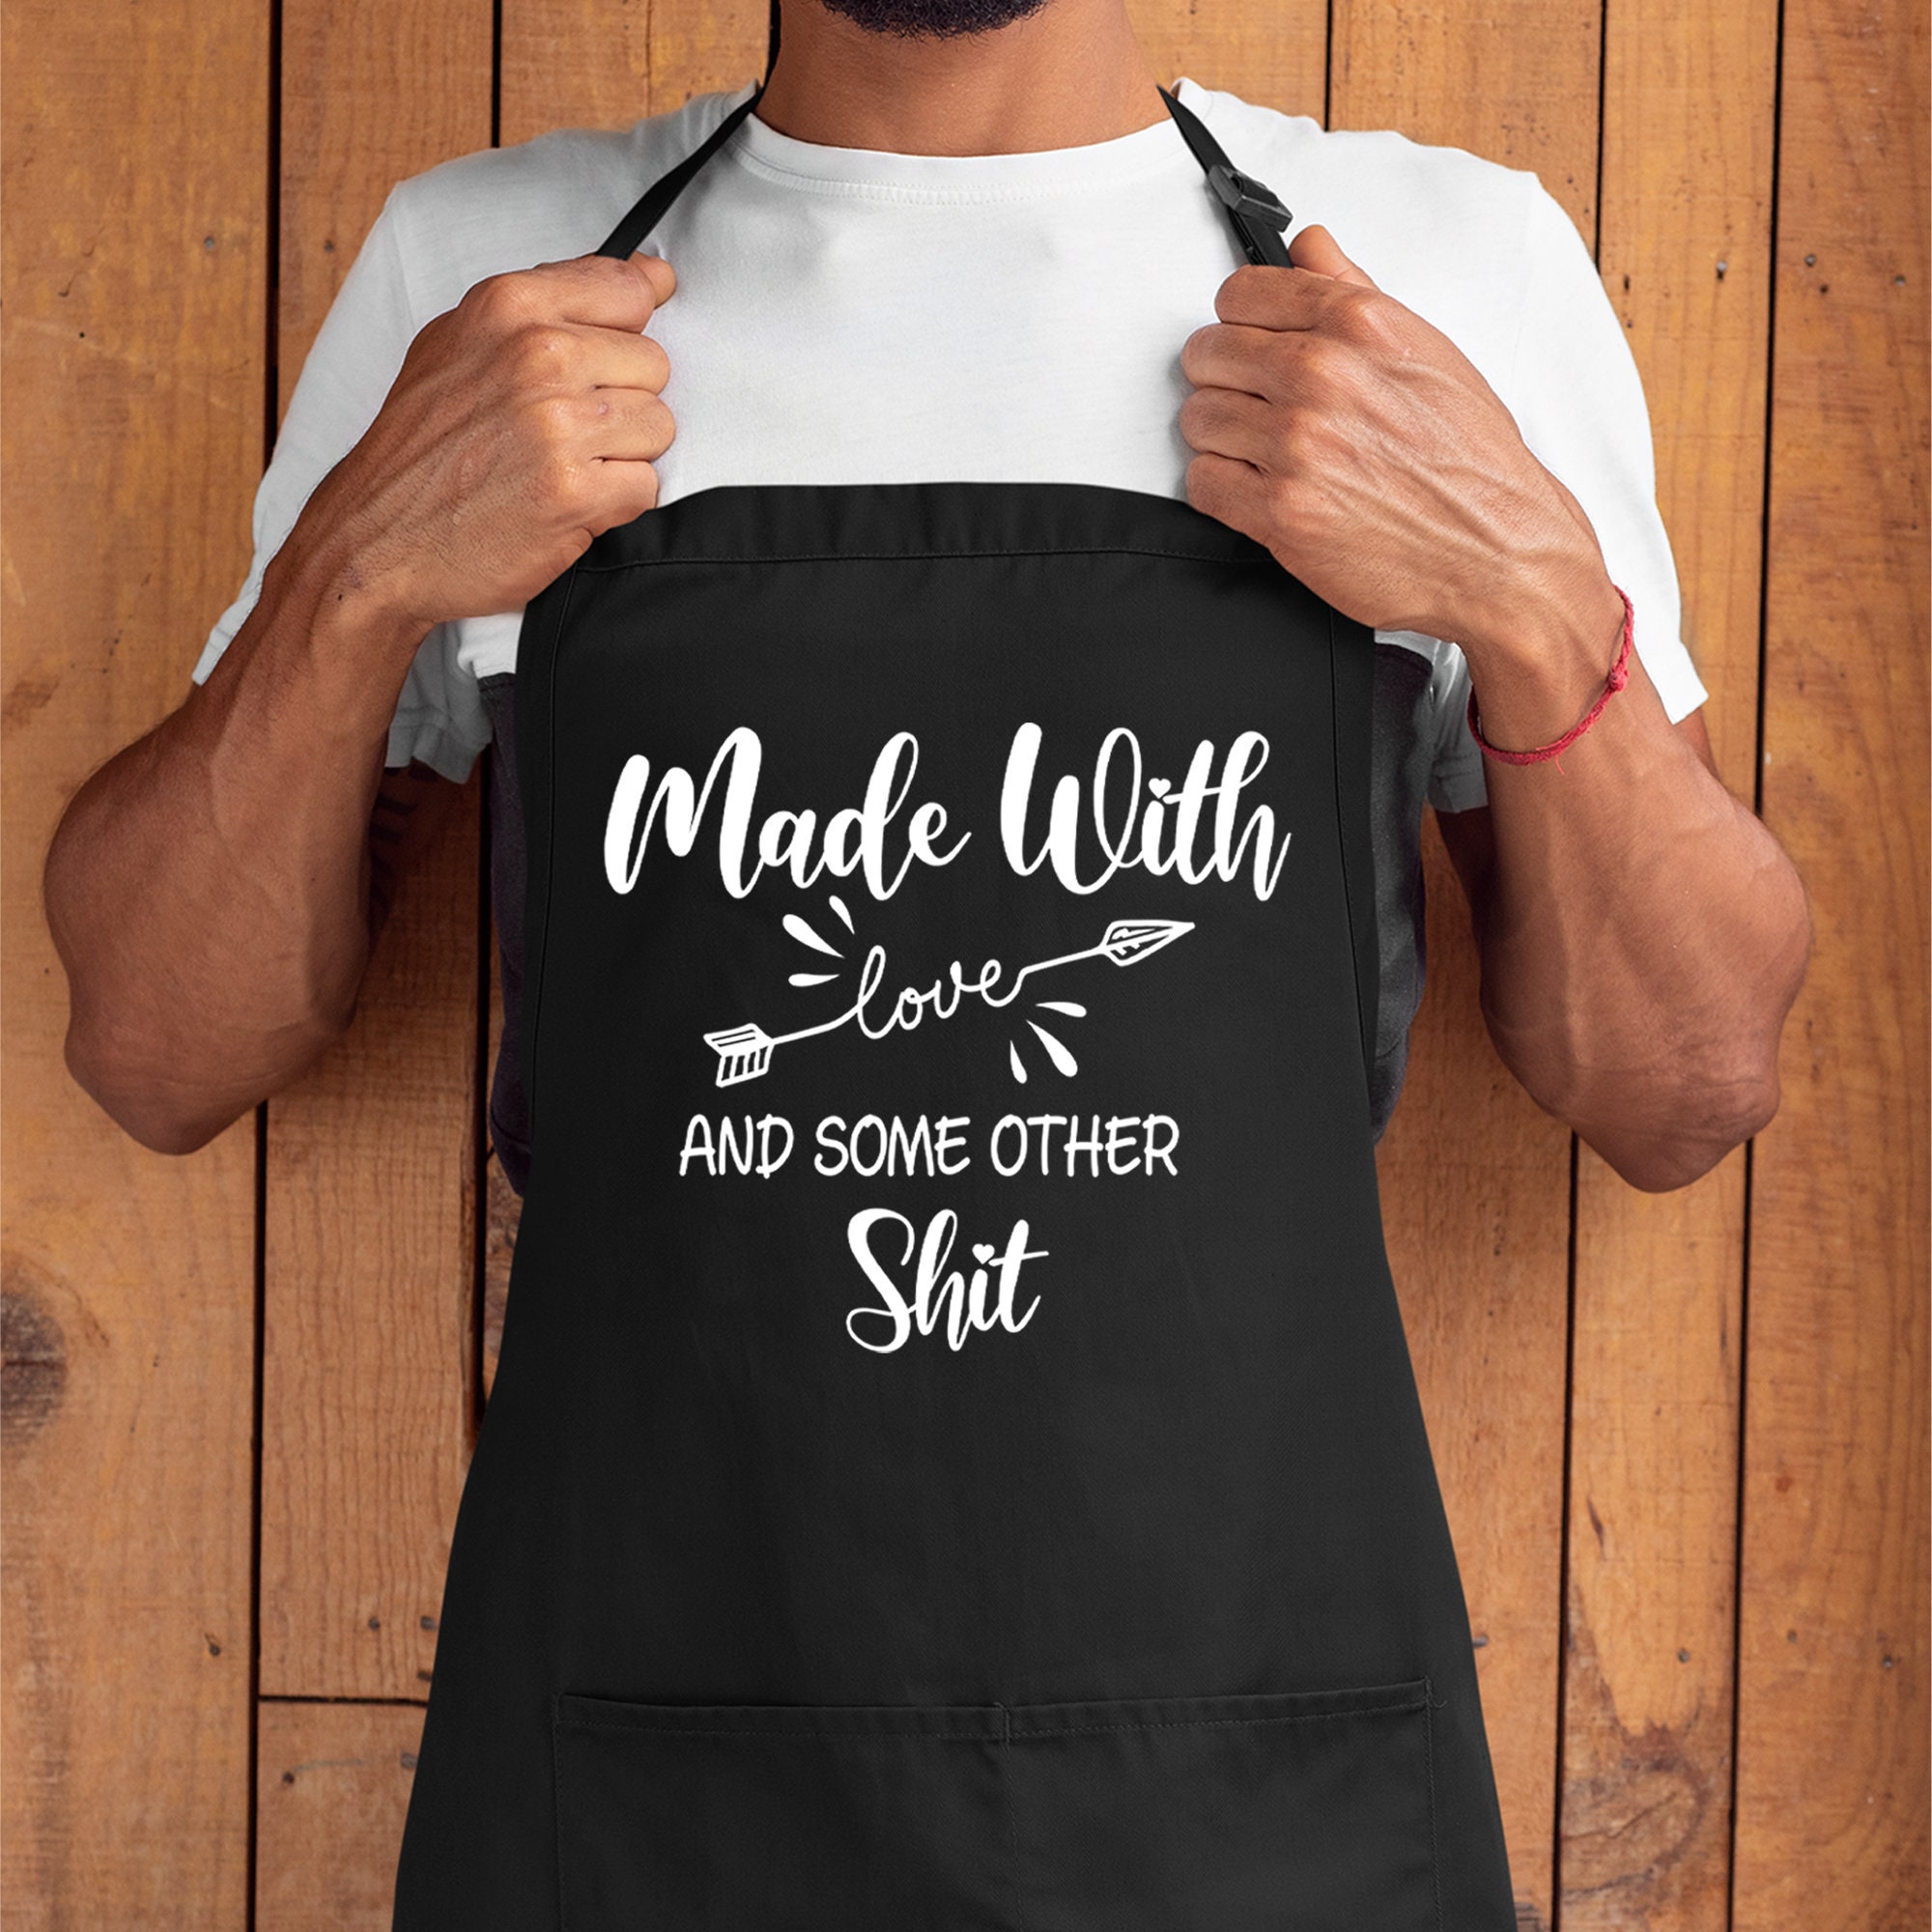 Funny Apron Gift Made With Love and Some Other Shit Apron for